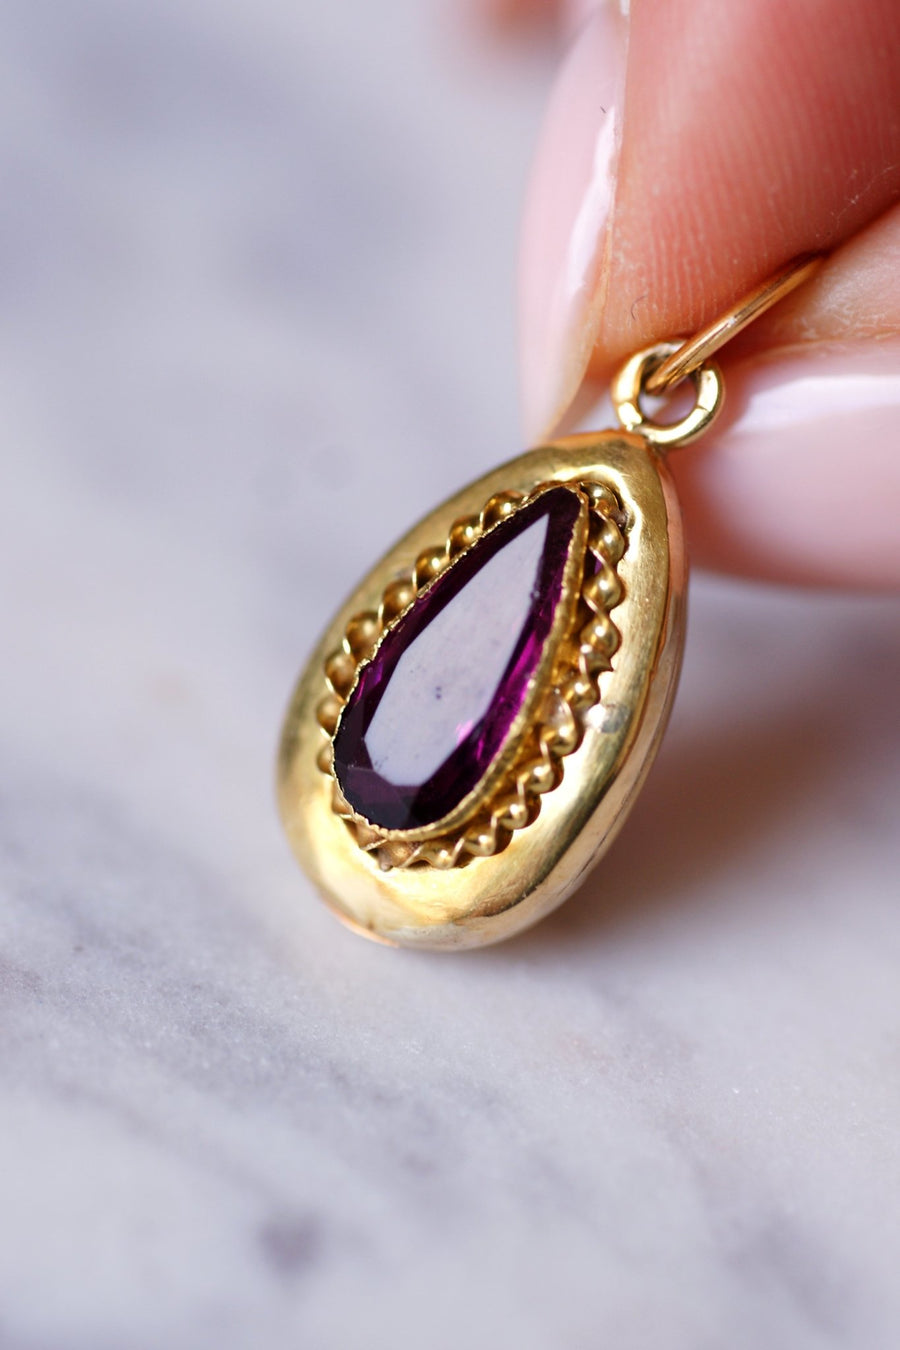 Antique drop pendant in yellow gold and purple stone - Galerie Pénélope